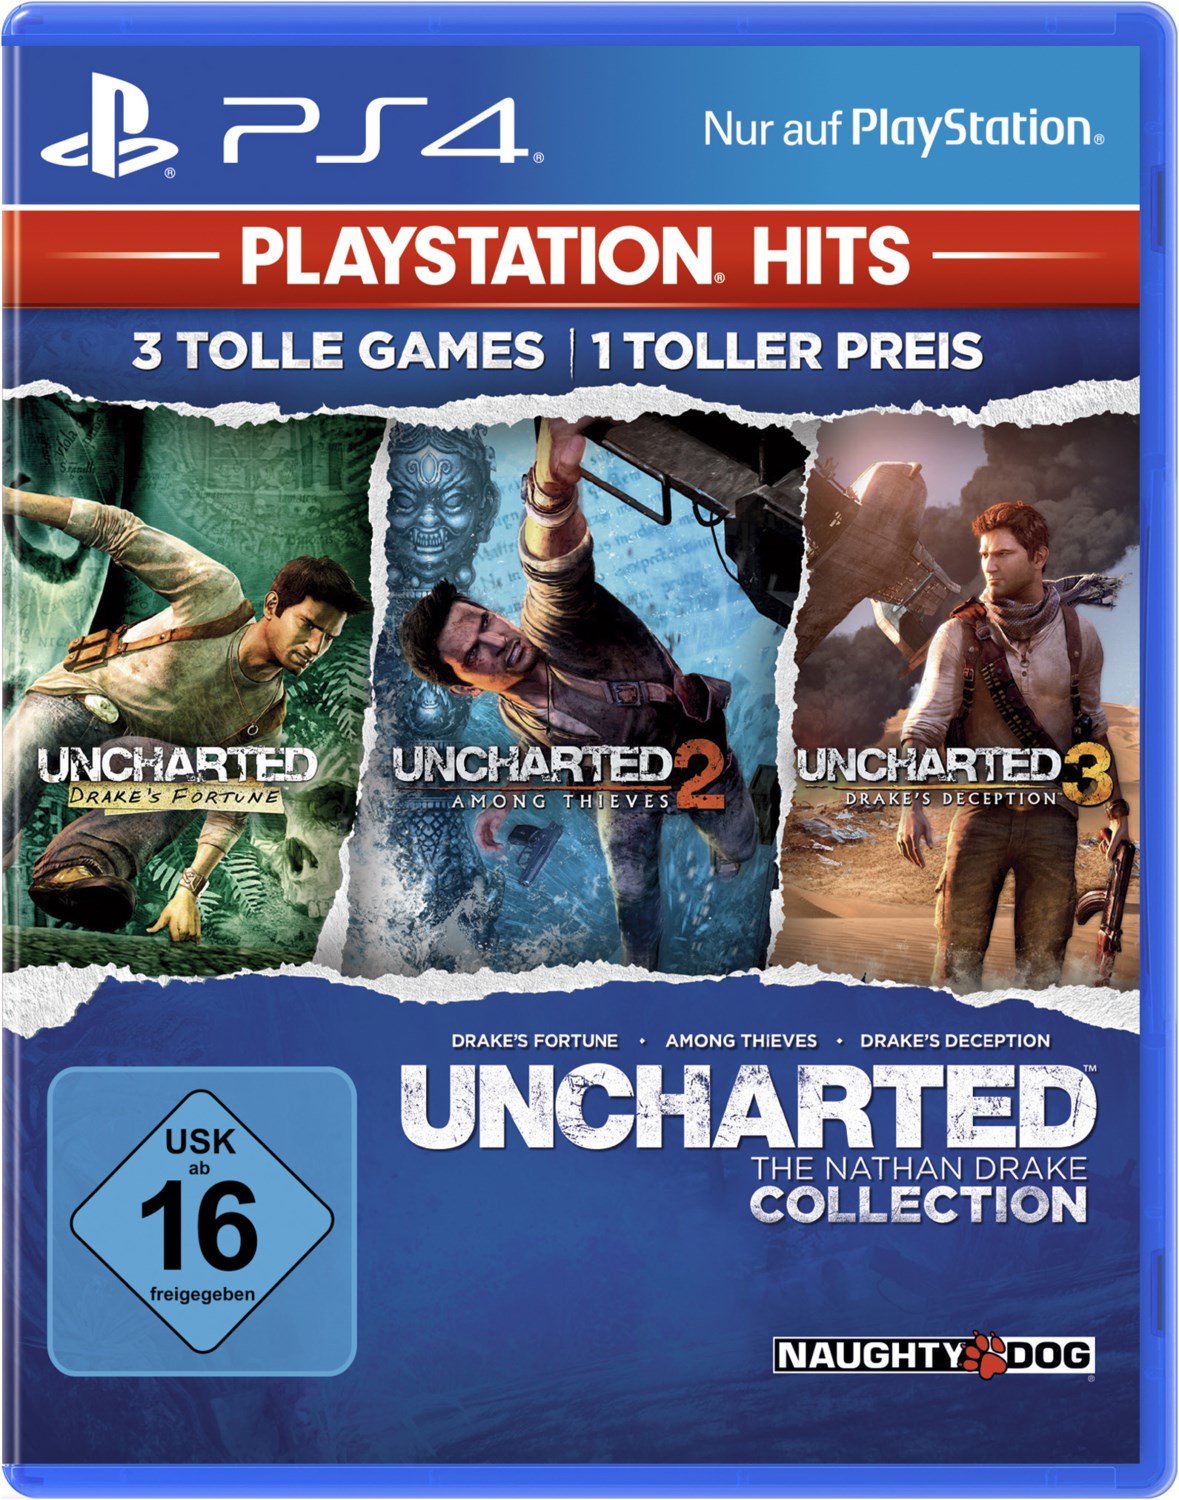 PS4 Uncharted Collection PS Hits von Software Pyramide